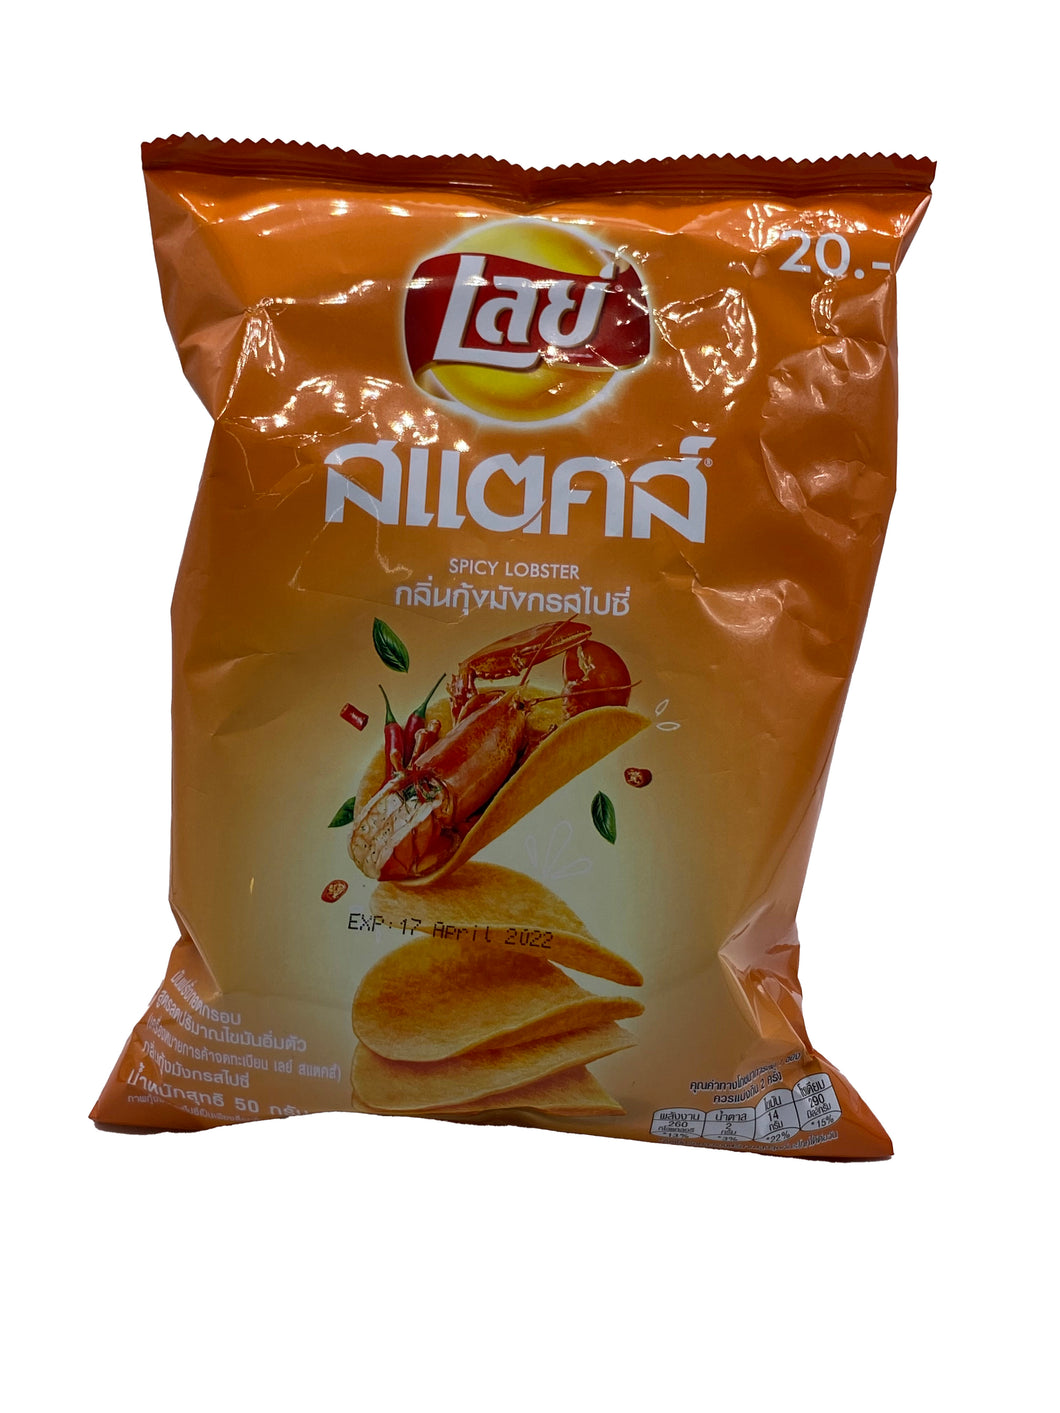 Lay's Spicy Lobster Flavor Potato Chips